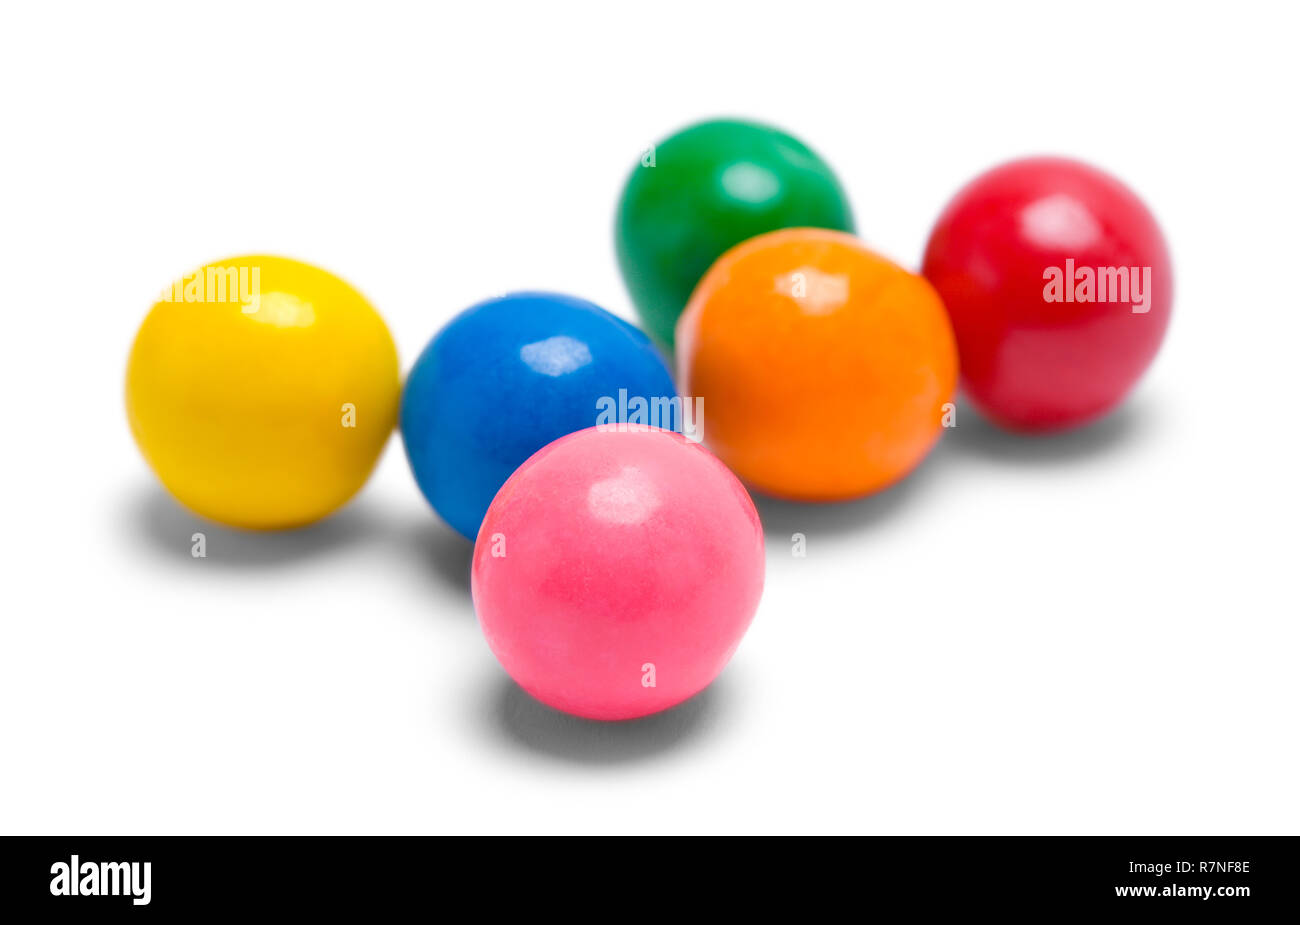 Few Gum Balls Isolated on a White Background. Stock Photo